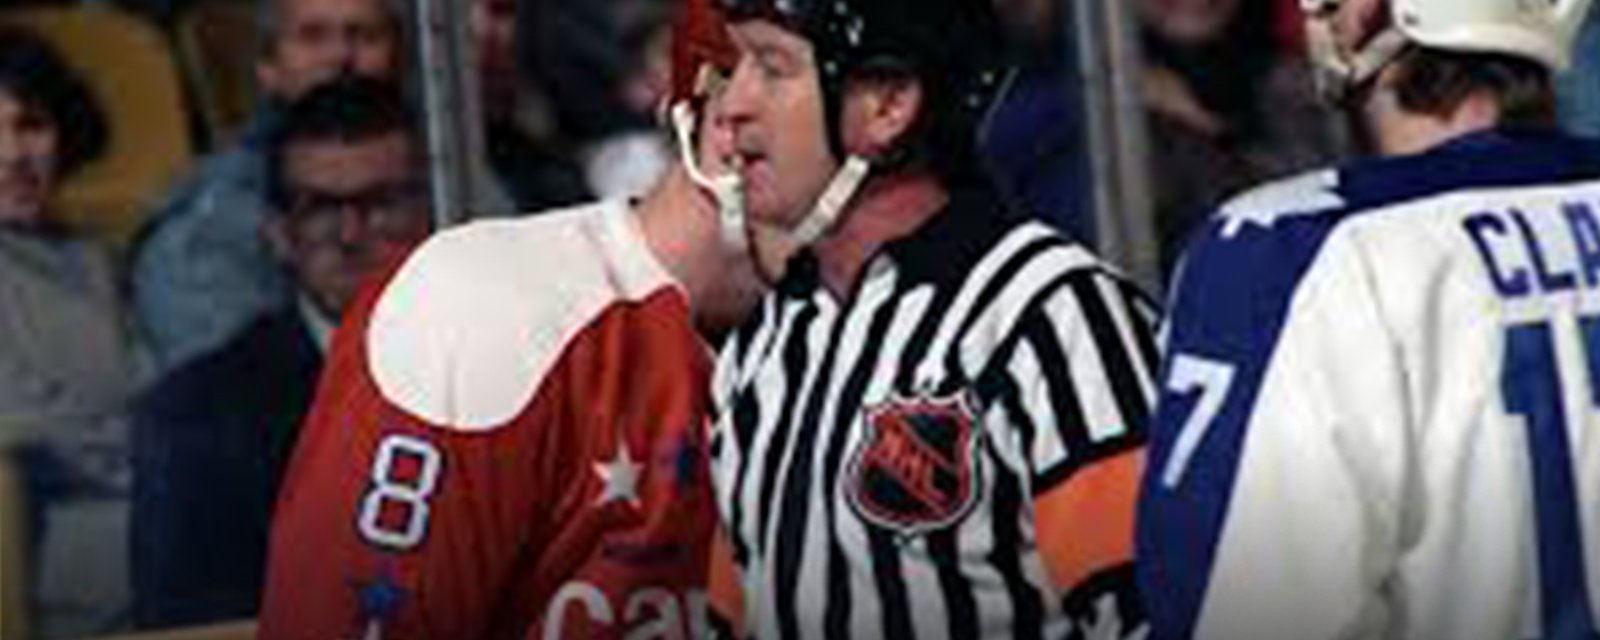 Longtime NHL referee Newell passes away at age 73